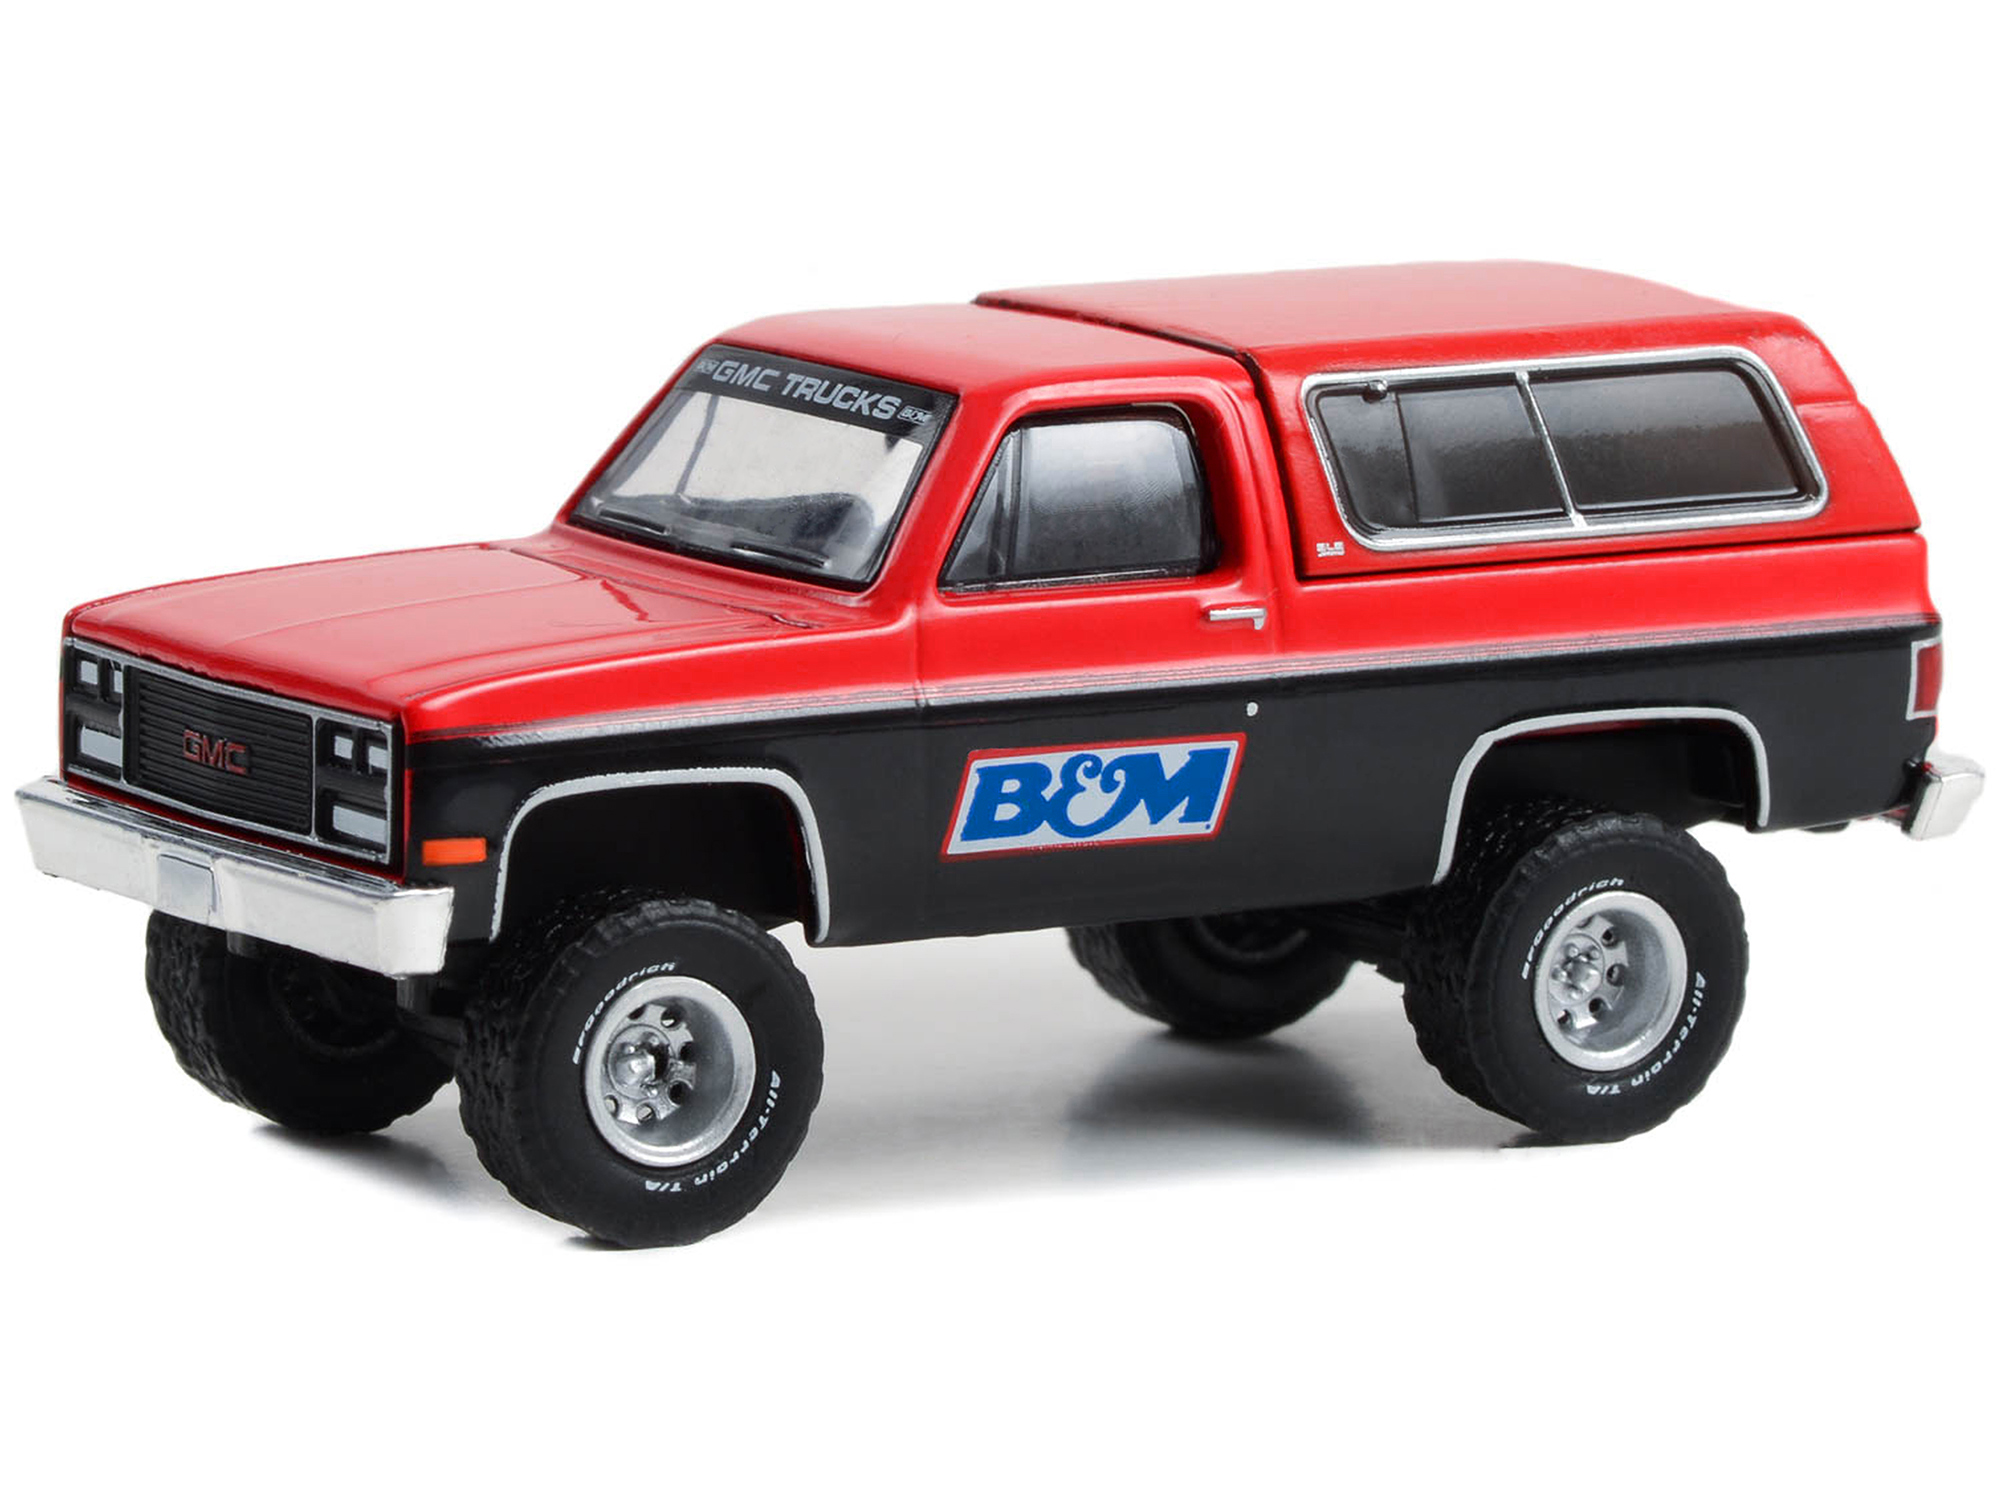 GreenLight 1991 GMC Jimmy SLE Red and Black "B&M Racing" "Blue Collar Collection" Series 12 1/64 Diecast Model Car by Greenlight